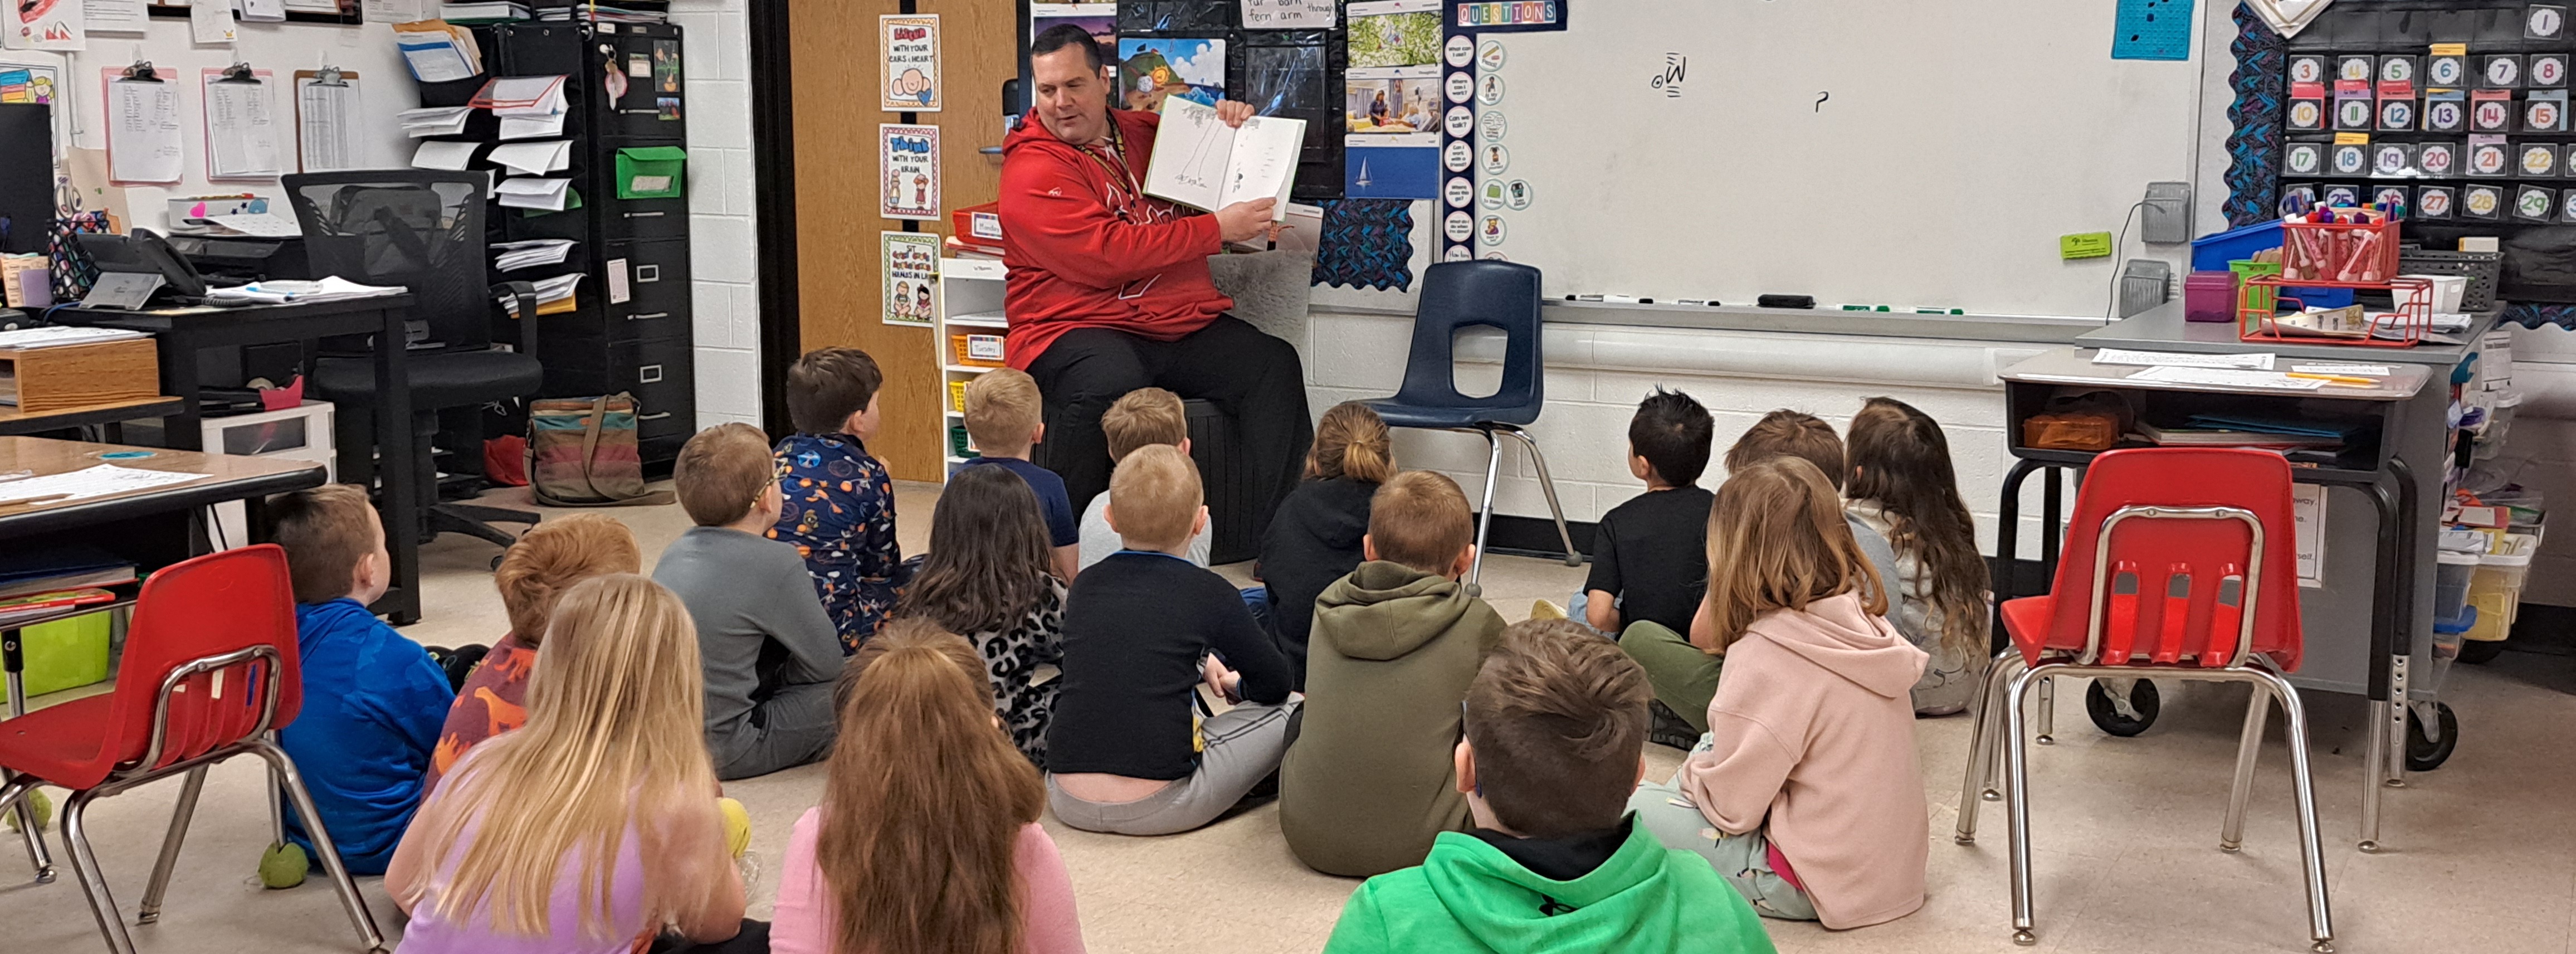 Superintendent Reading to Students